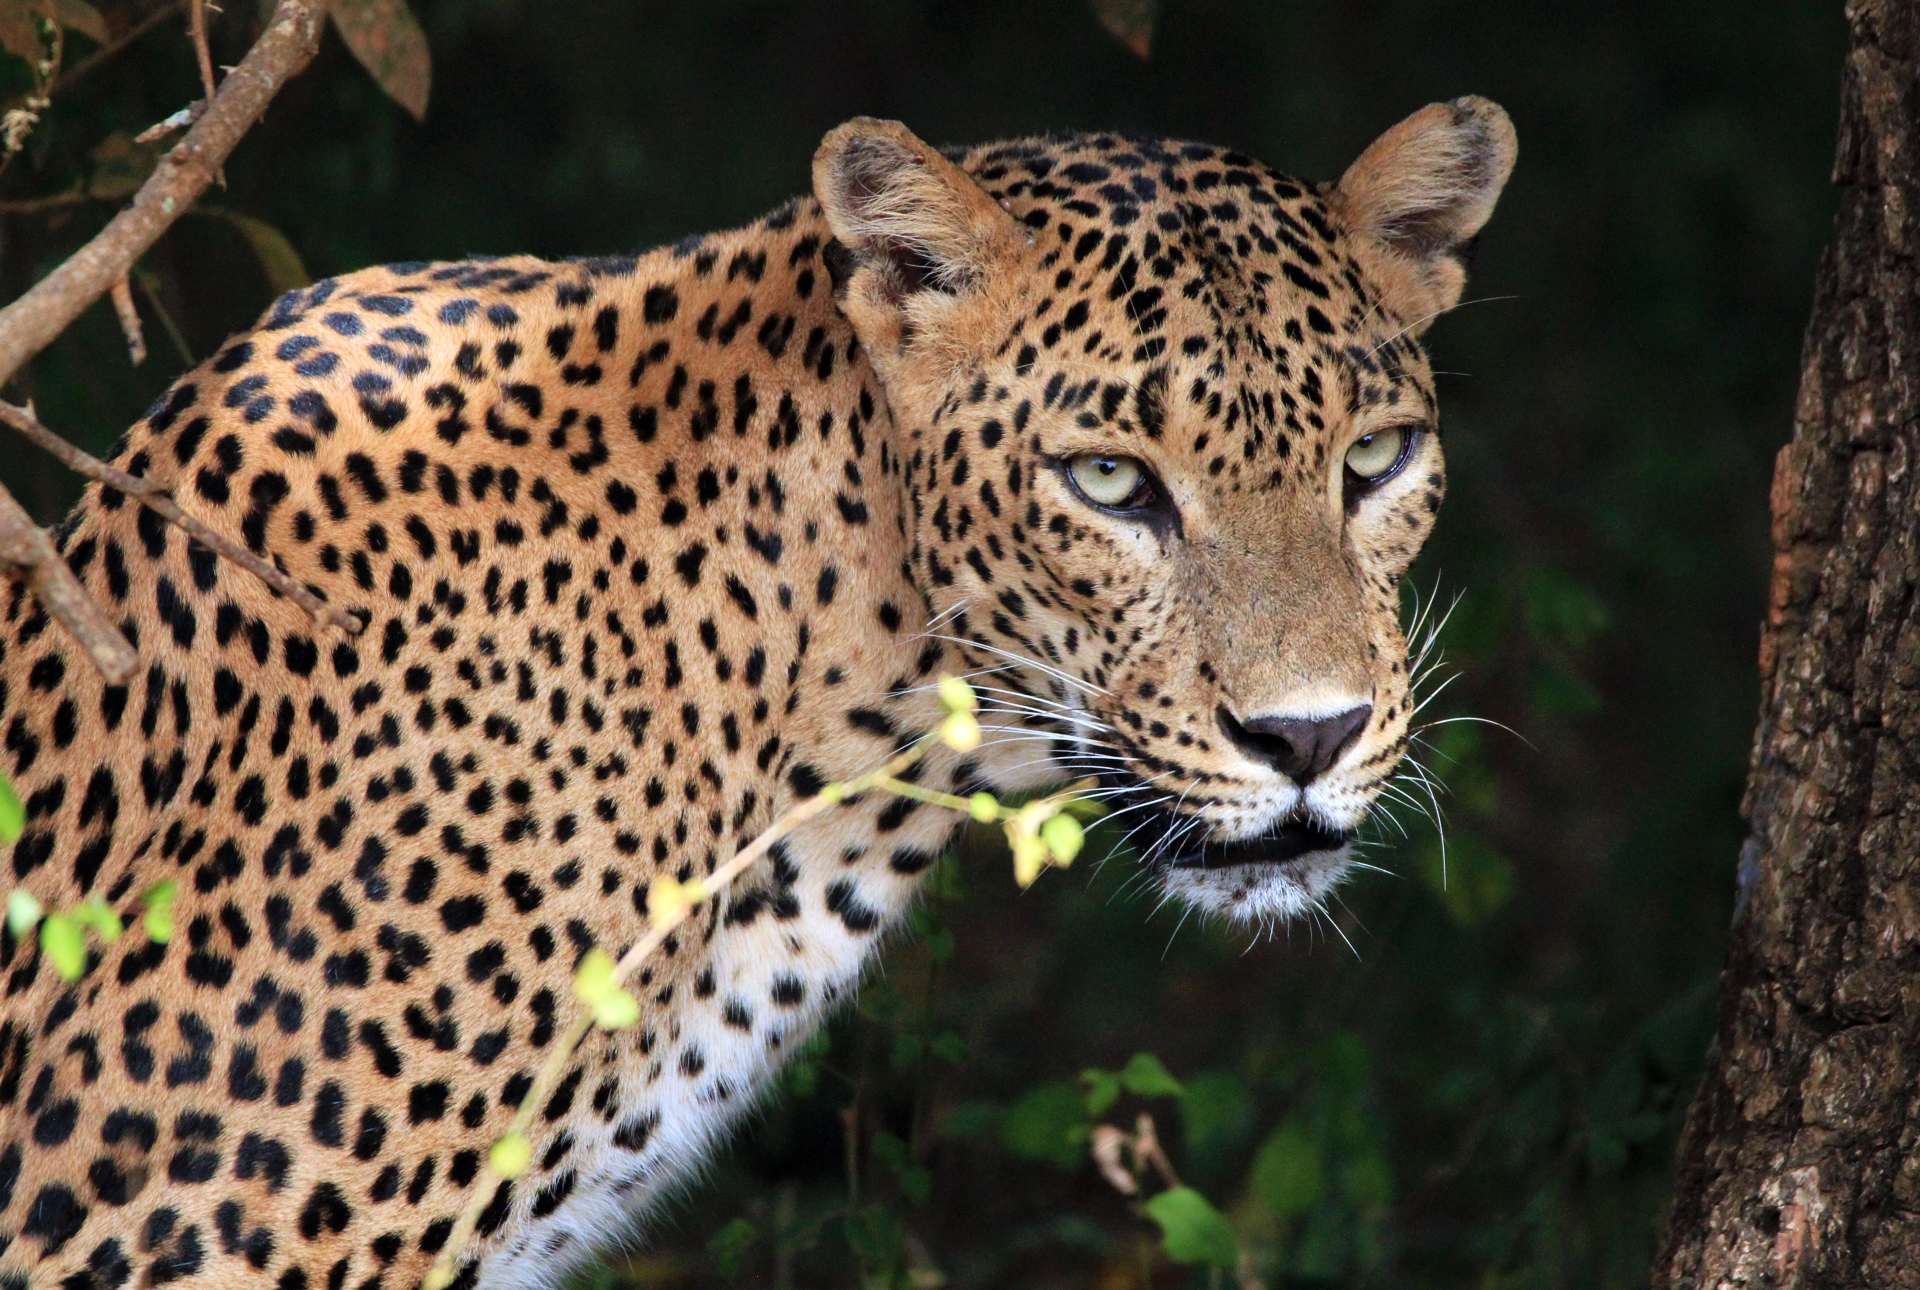 Leopard in Yala National Park - Much in little: A family journey to Sri Lanka